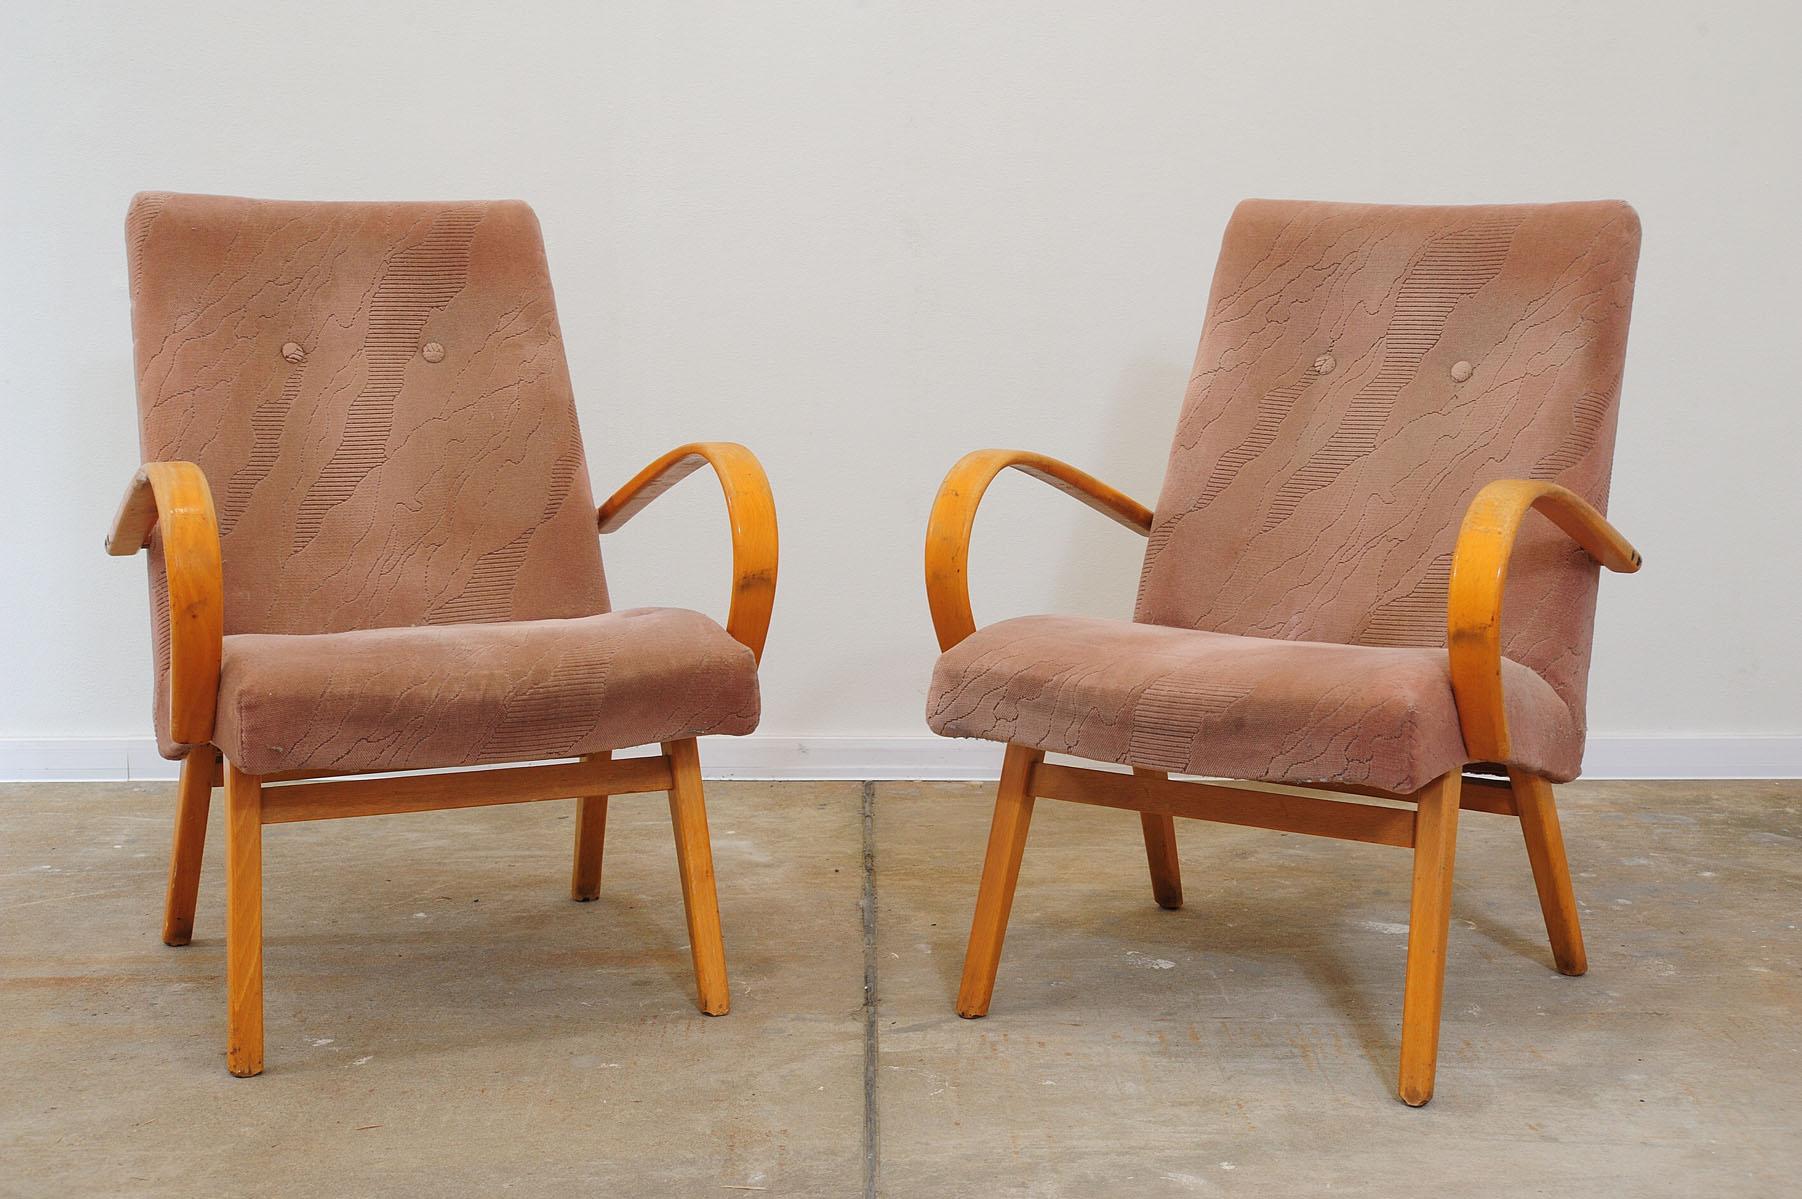 These bentwood armchairs were designed by Jaroslav Šmídek and made in the former Czechoslovakia in the 1960´s.

Made of beech wood and upholstery.

The armchairs are sturdy and comfortable. It shows the usual signs of age and using.

The upholstery